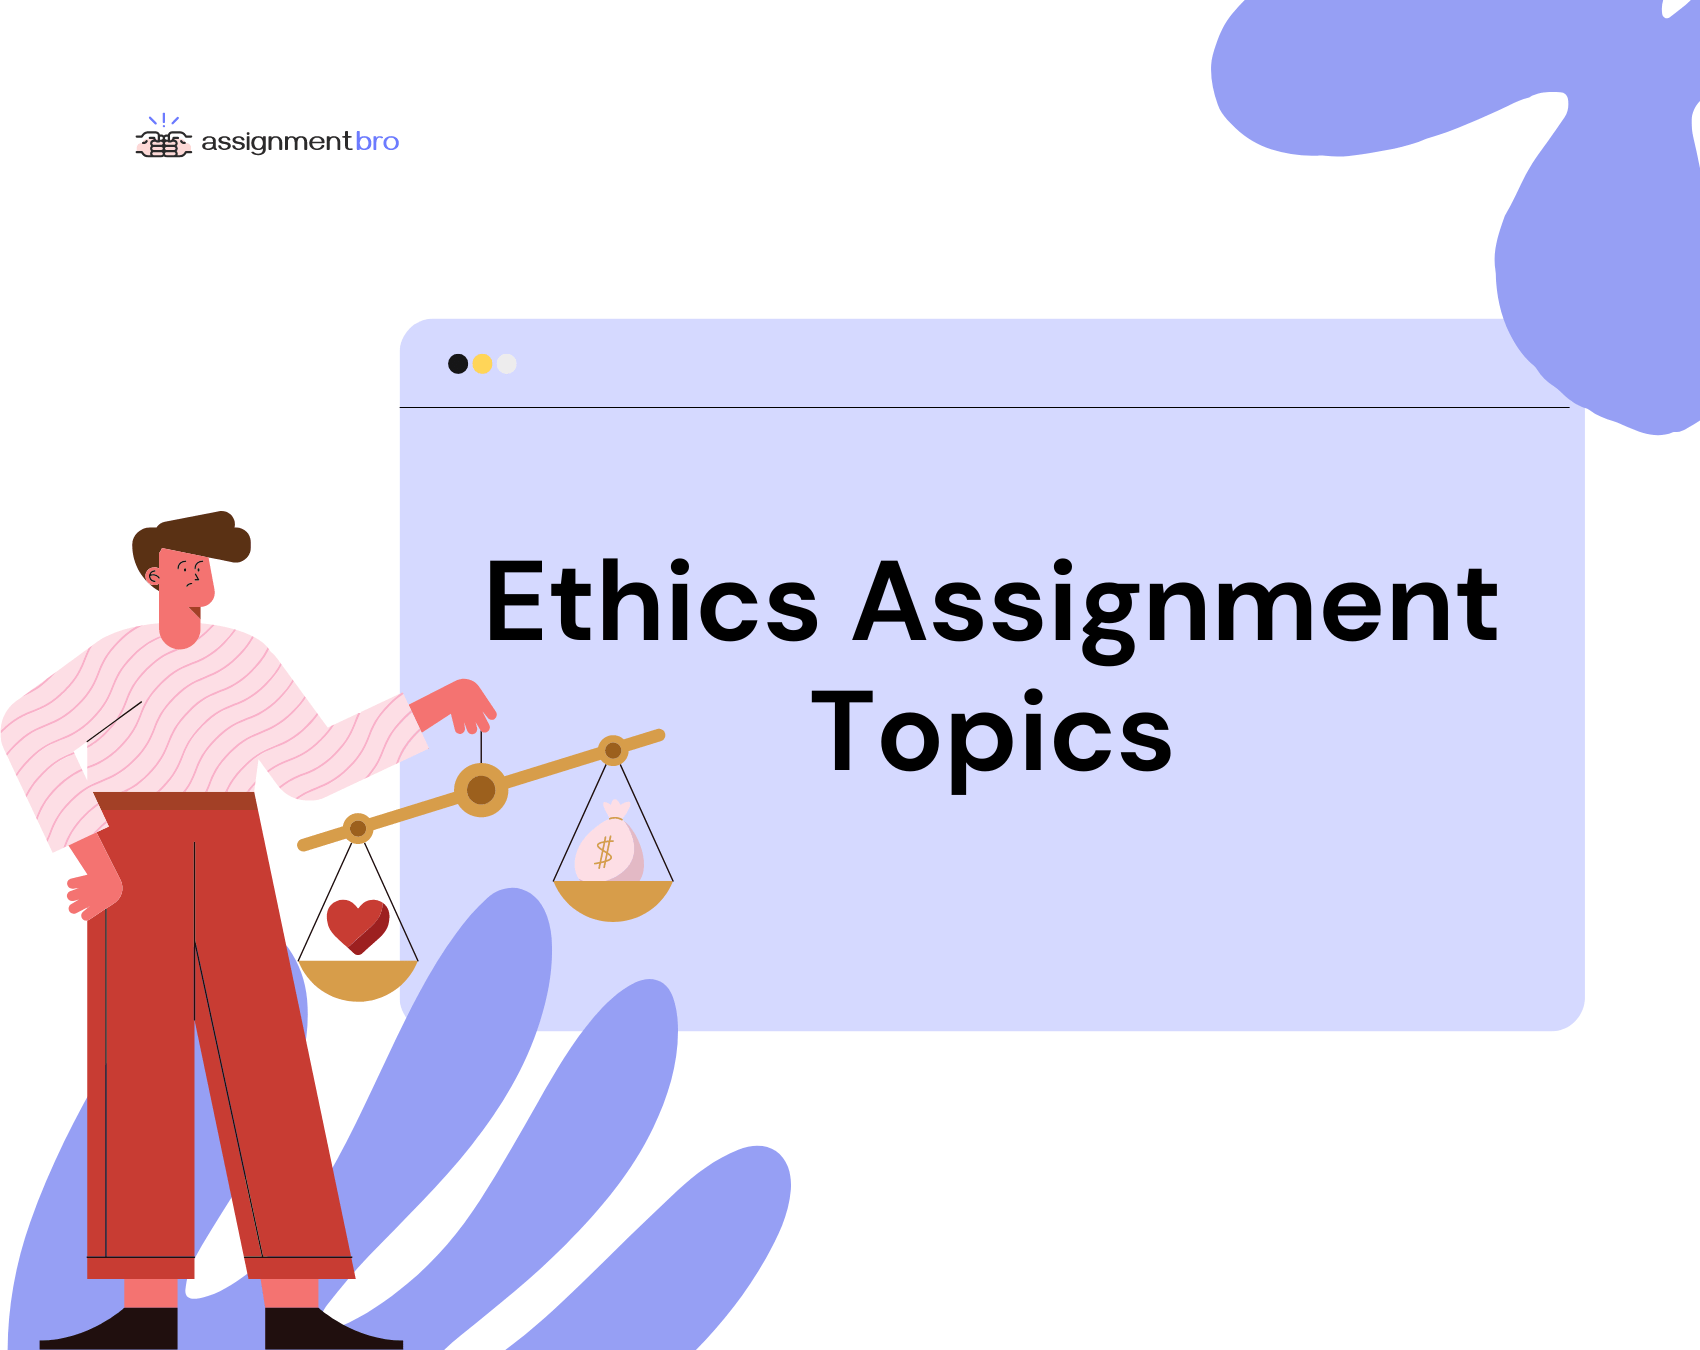 ethical assignment topics